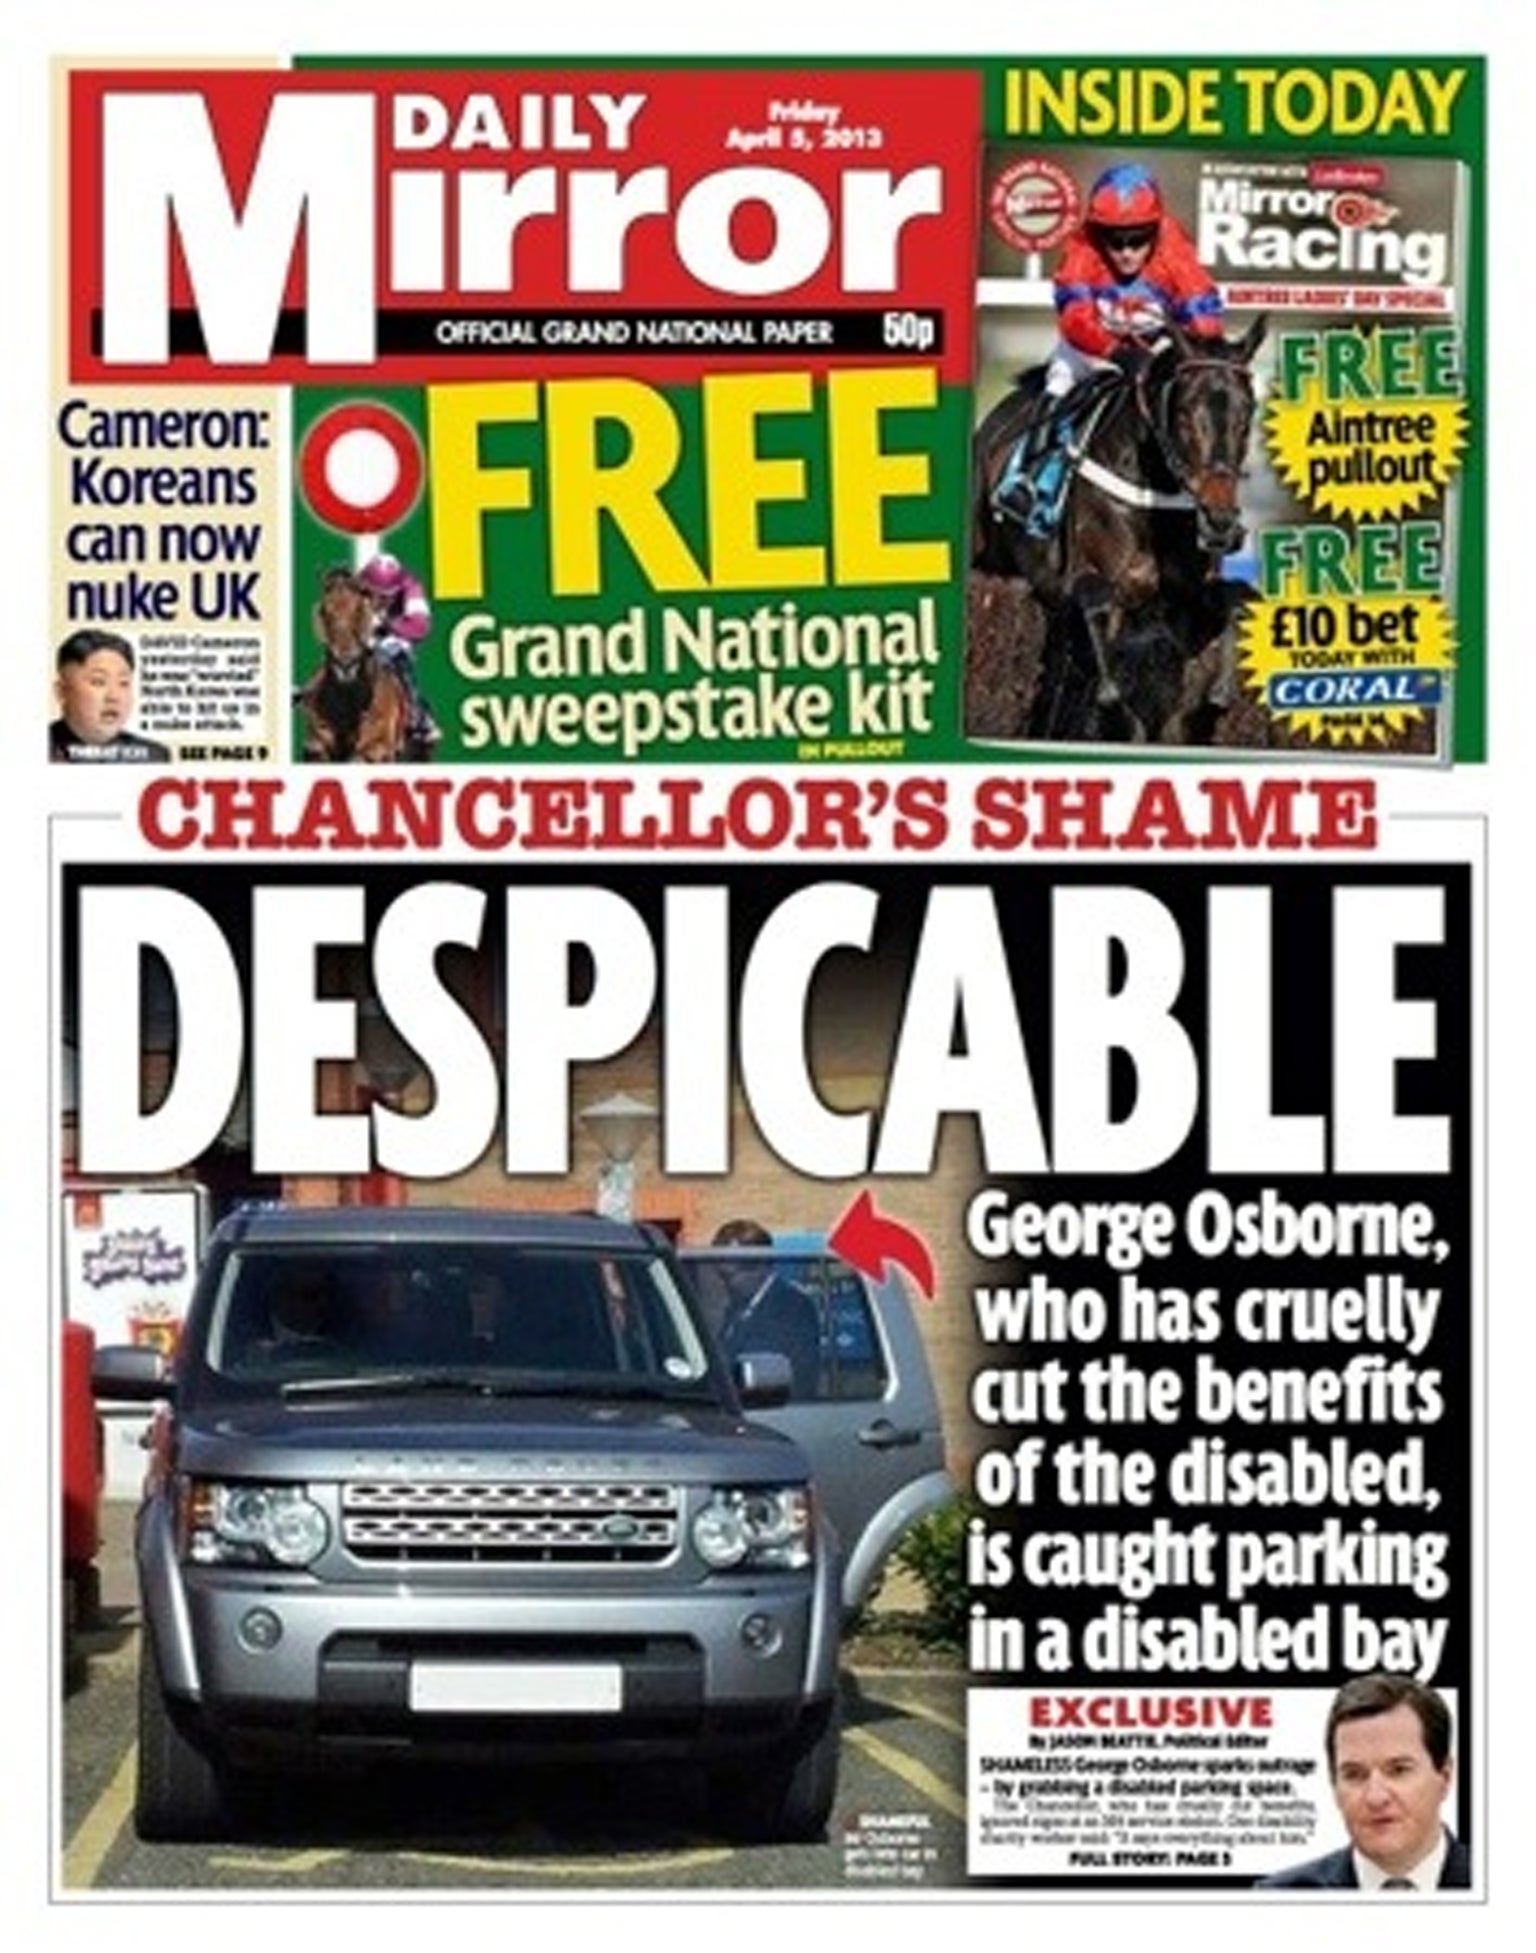 The front page of today's Mirror, showing George Osborne's car parked in a disabled bay at Magor services